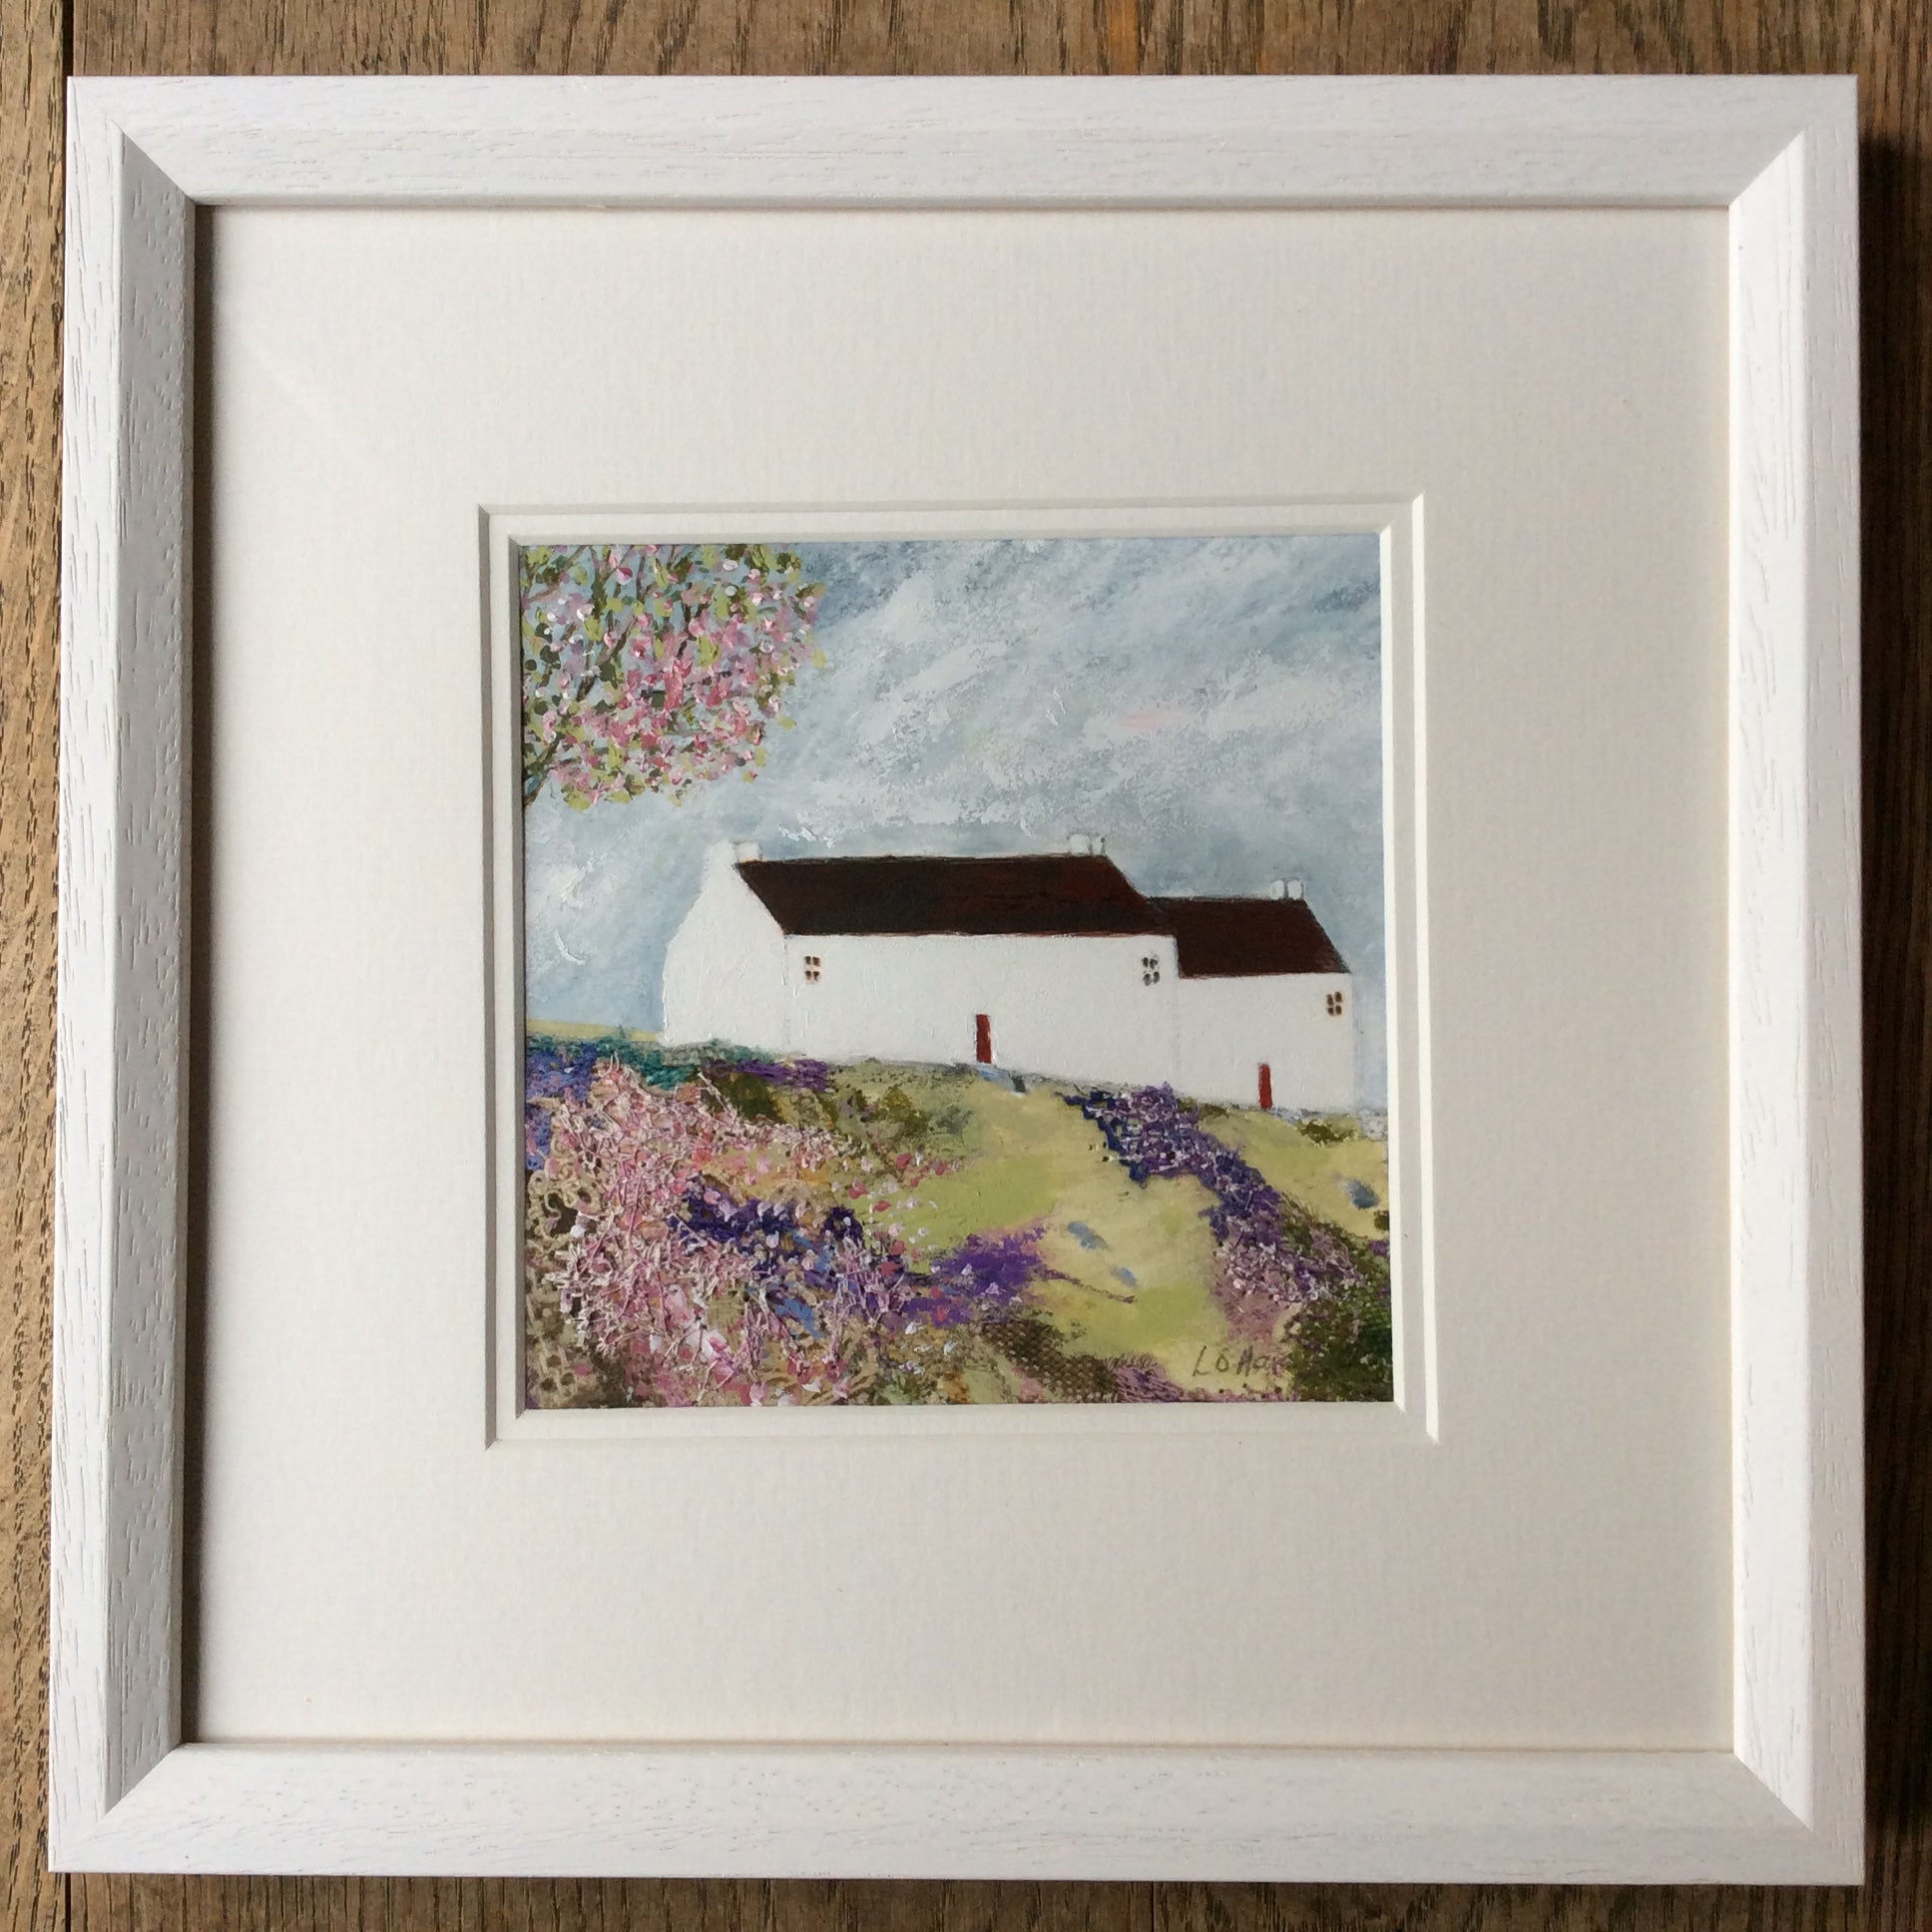 Mixed Media Art print work by Louise O'Hara "The Blossom Tree at White Cottage"